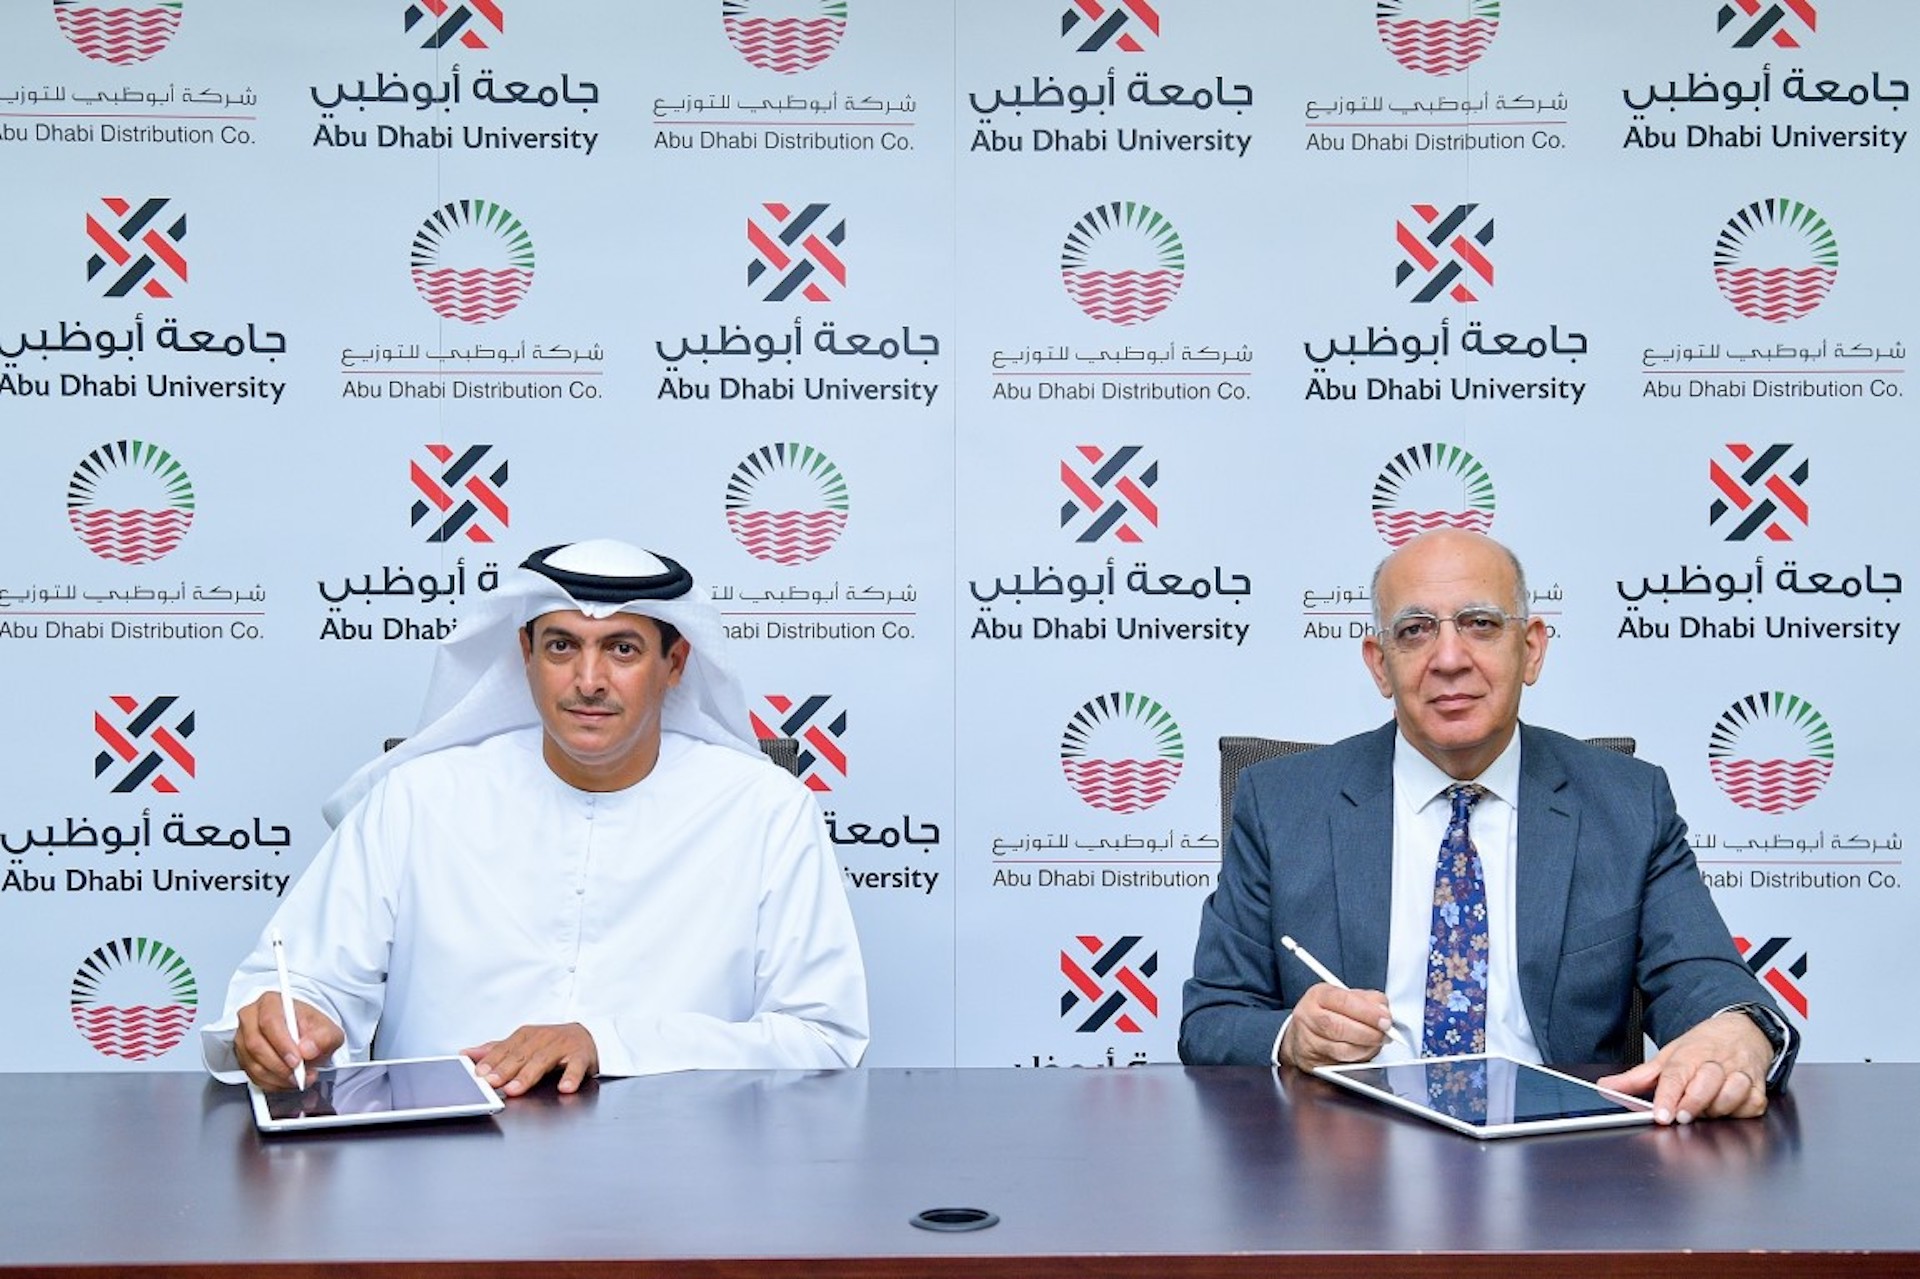 ADDC and ADU sign MoU for utility sector innovation